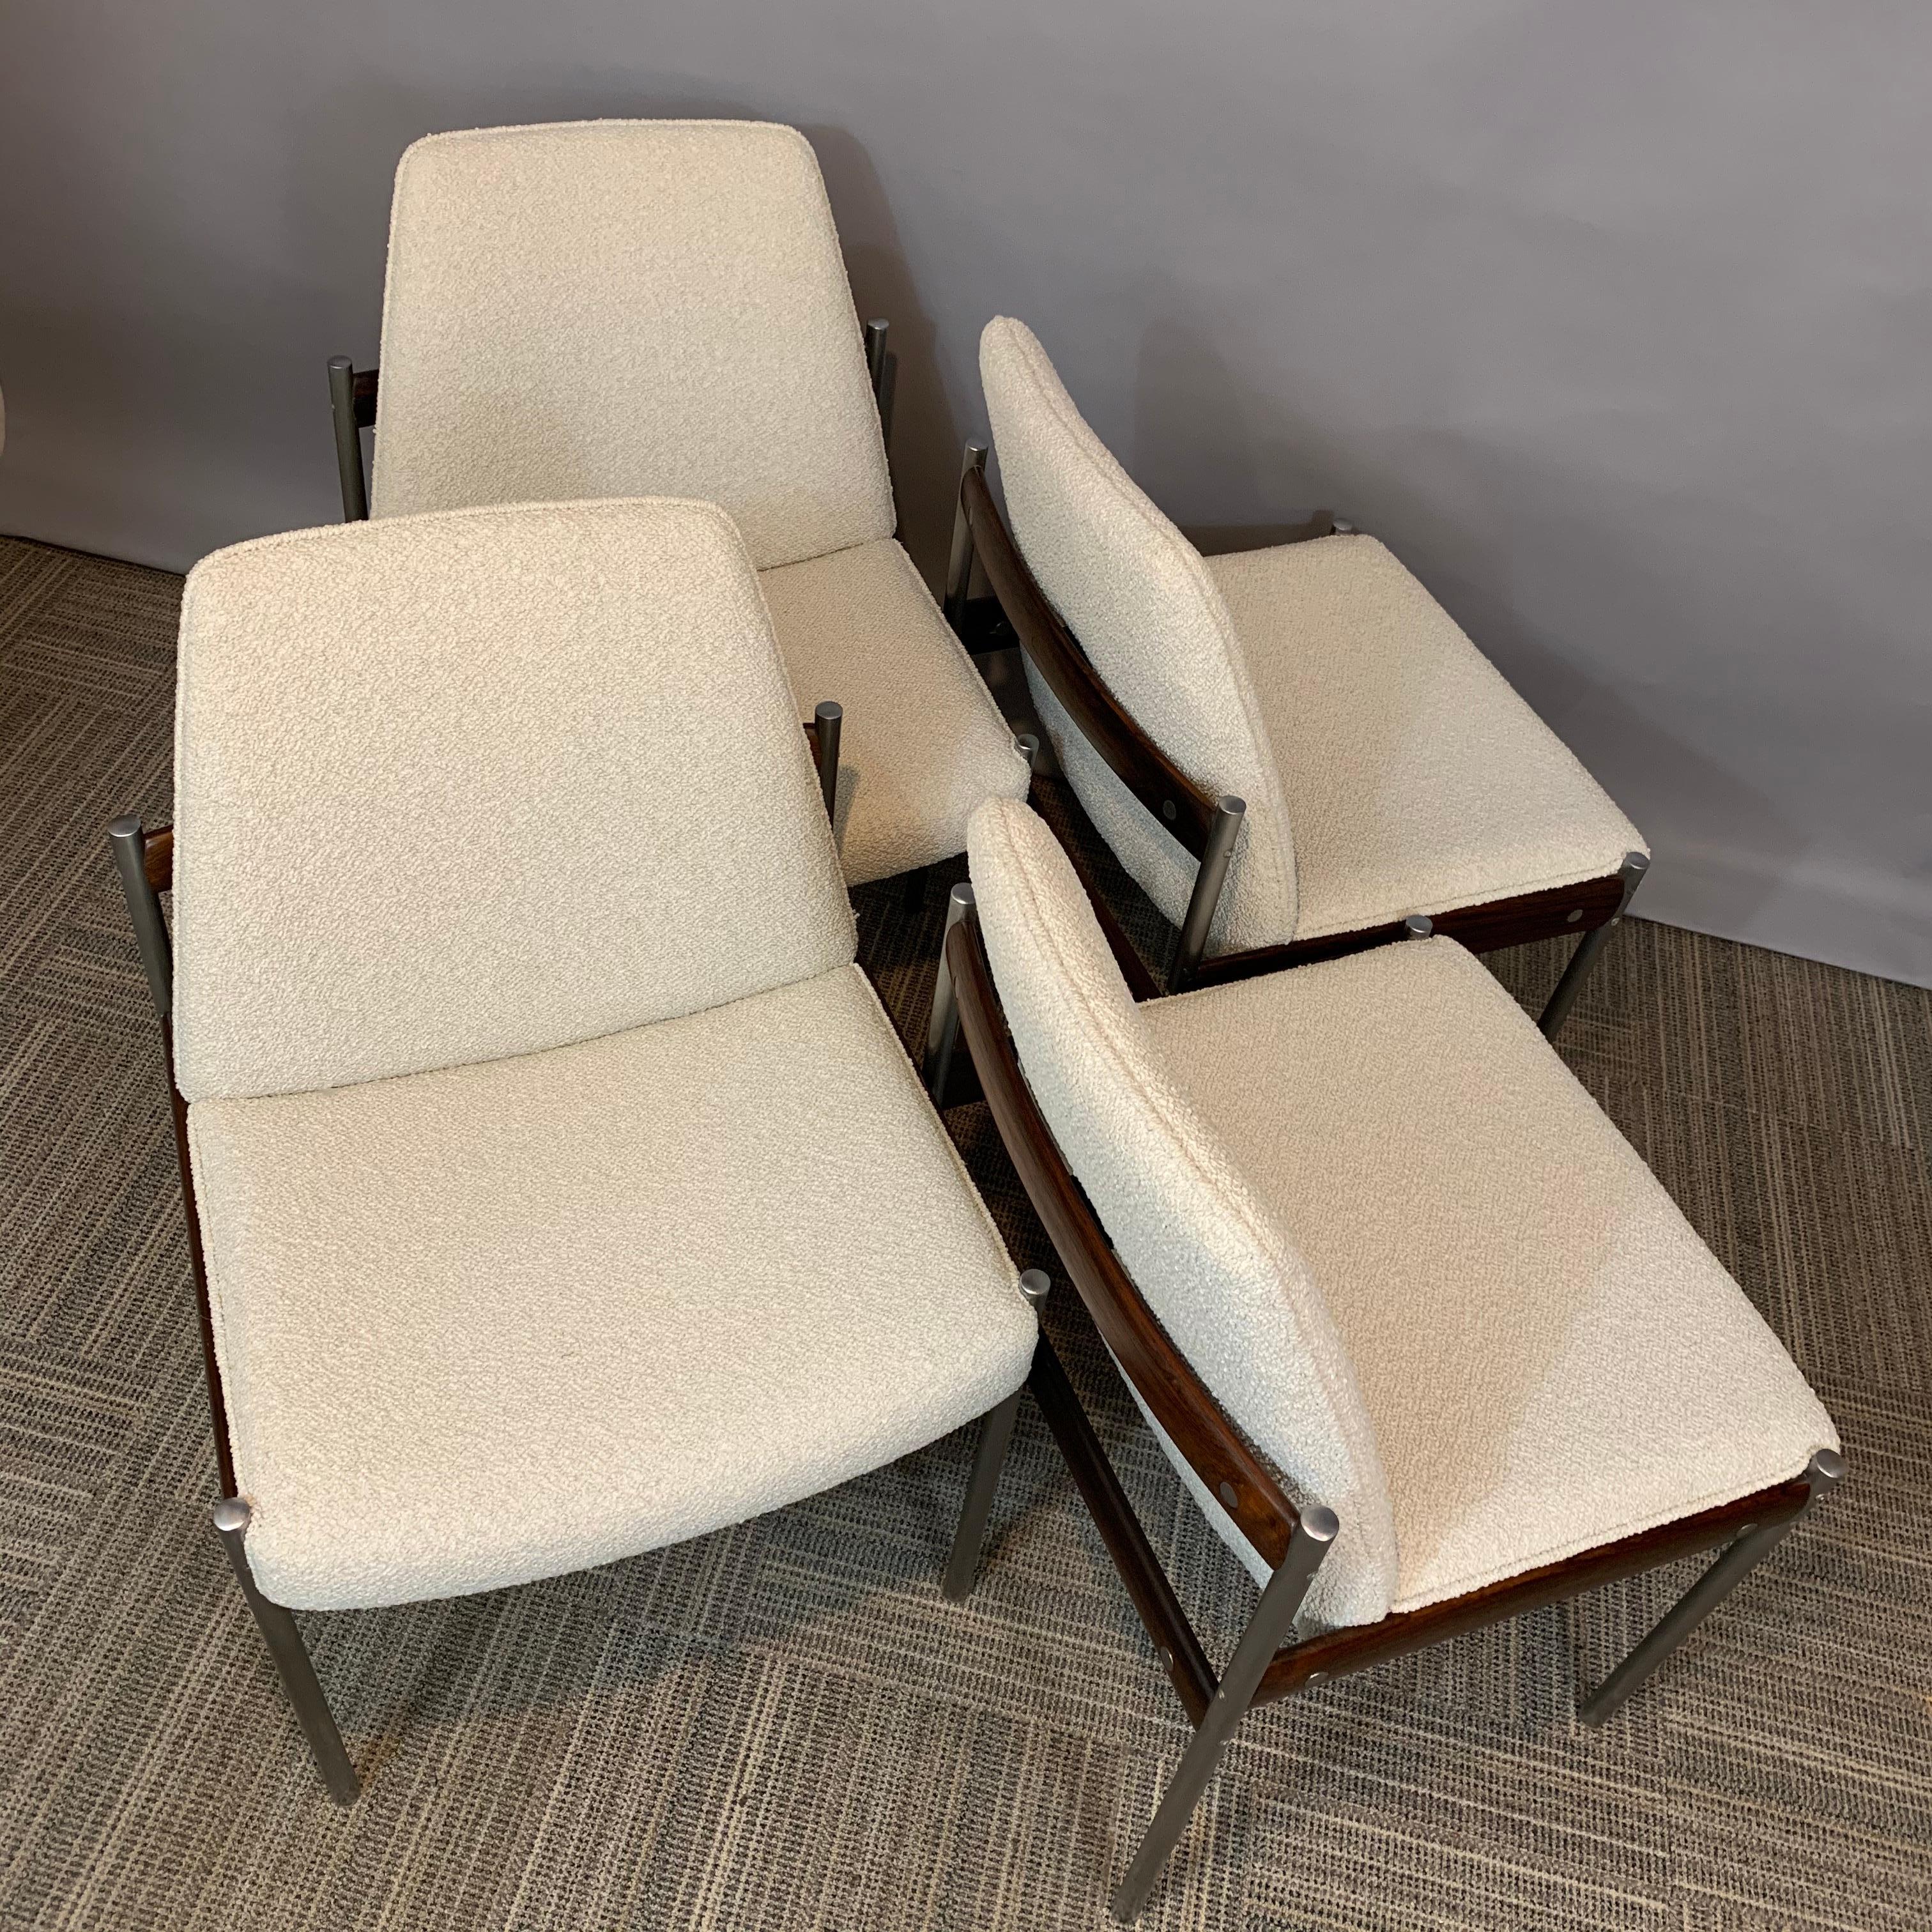 A stunning set of 4 original dining chairs designed by Sven Ivar Dysthe and manufactured by Dokka Mobler in Norway in the 1960s. The frame is manufactured from a combination of Rosewood, chrome-plated metal tubes and recently reupholstered Boucle